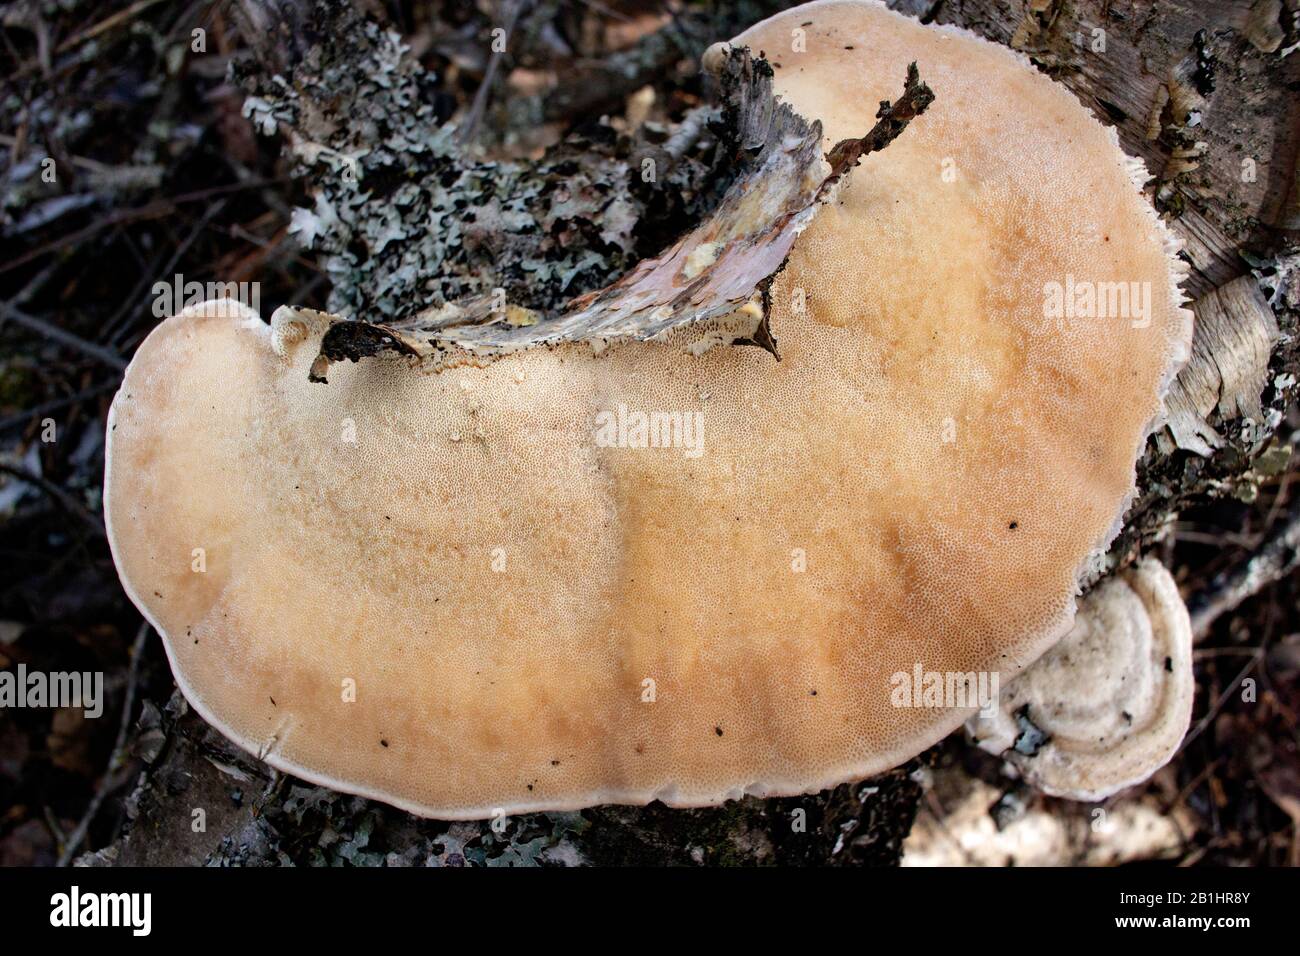 The underside of a hairy bracket mushroom (Trametes hirsuta), showing the pores. The mushroom was found growing on a red birch stump (Betula occidenta Stock Photo